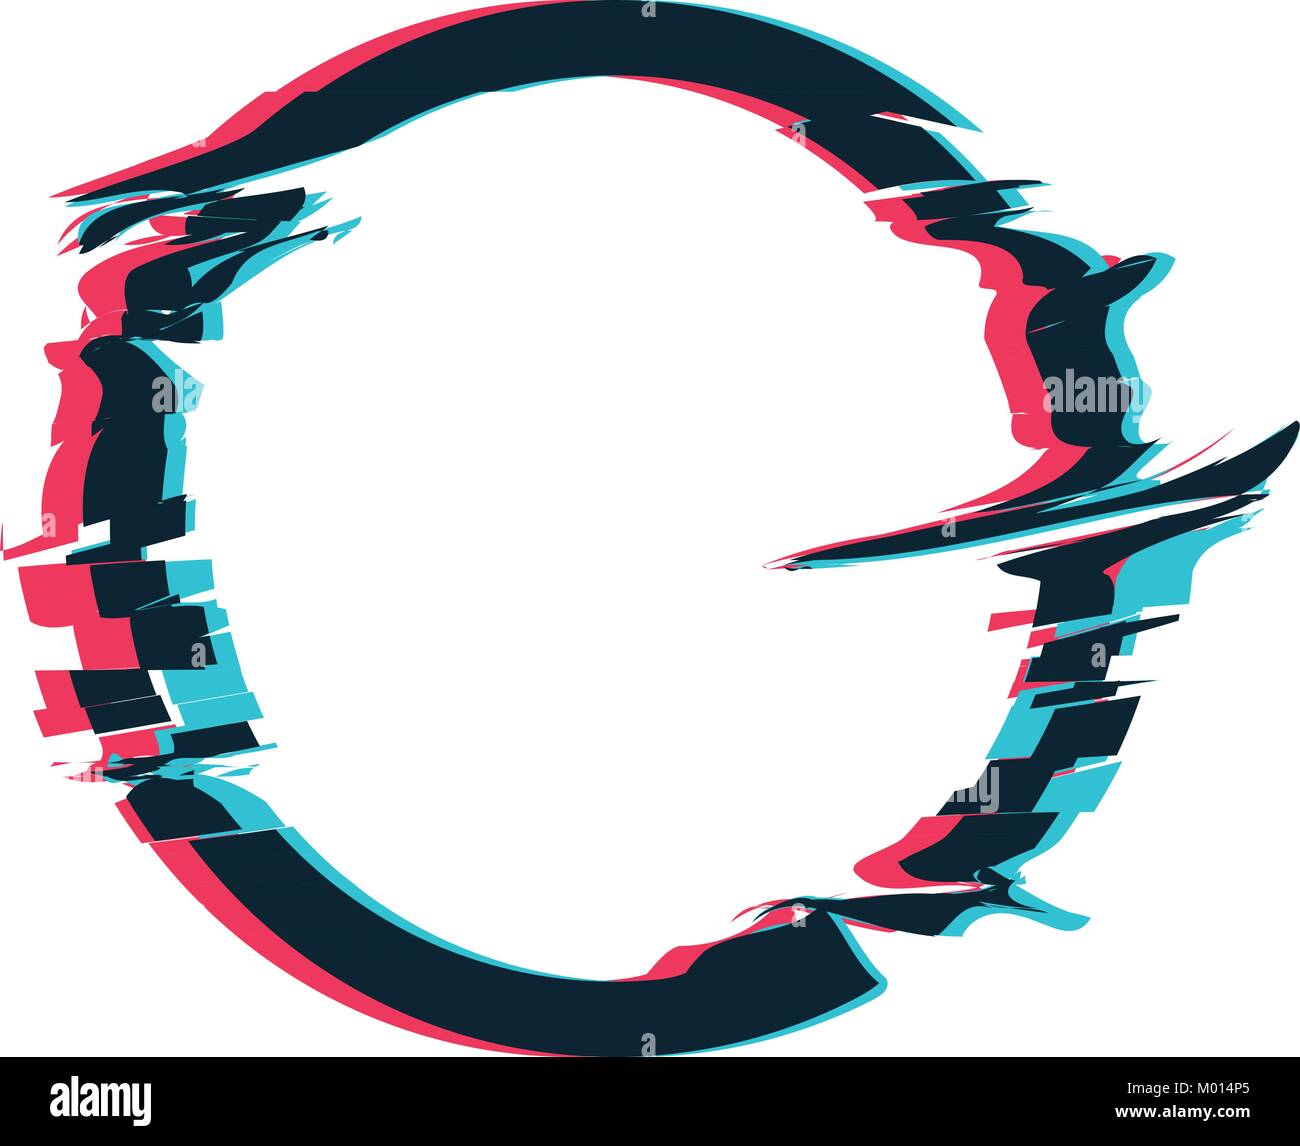 Glitch effect circle distorted shape digital Vector Image